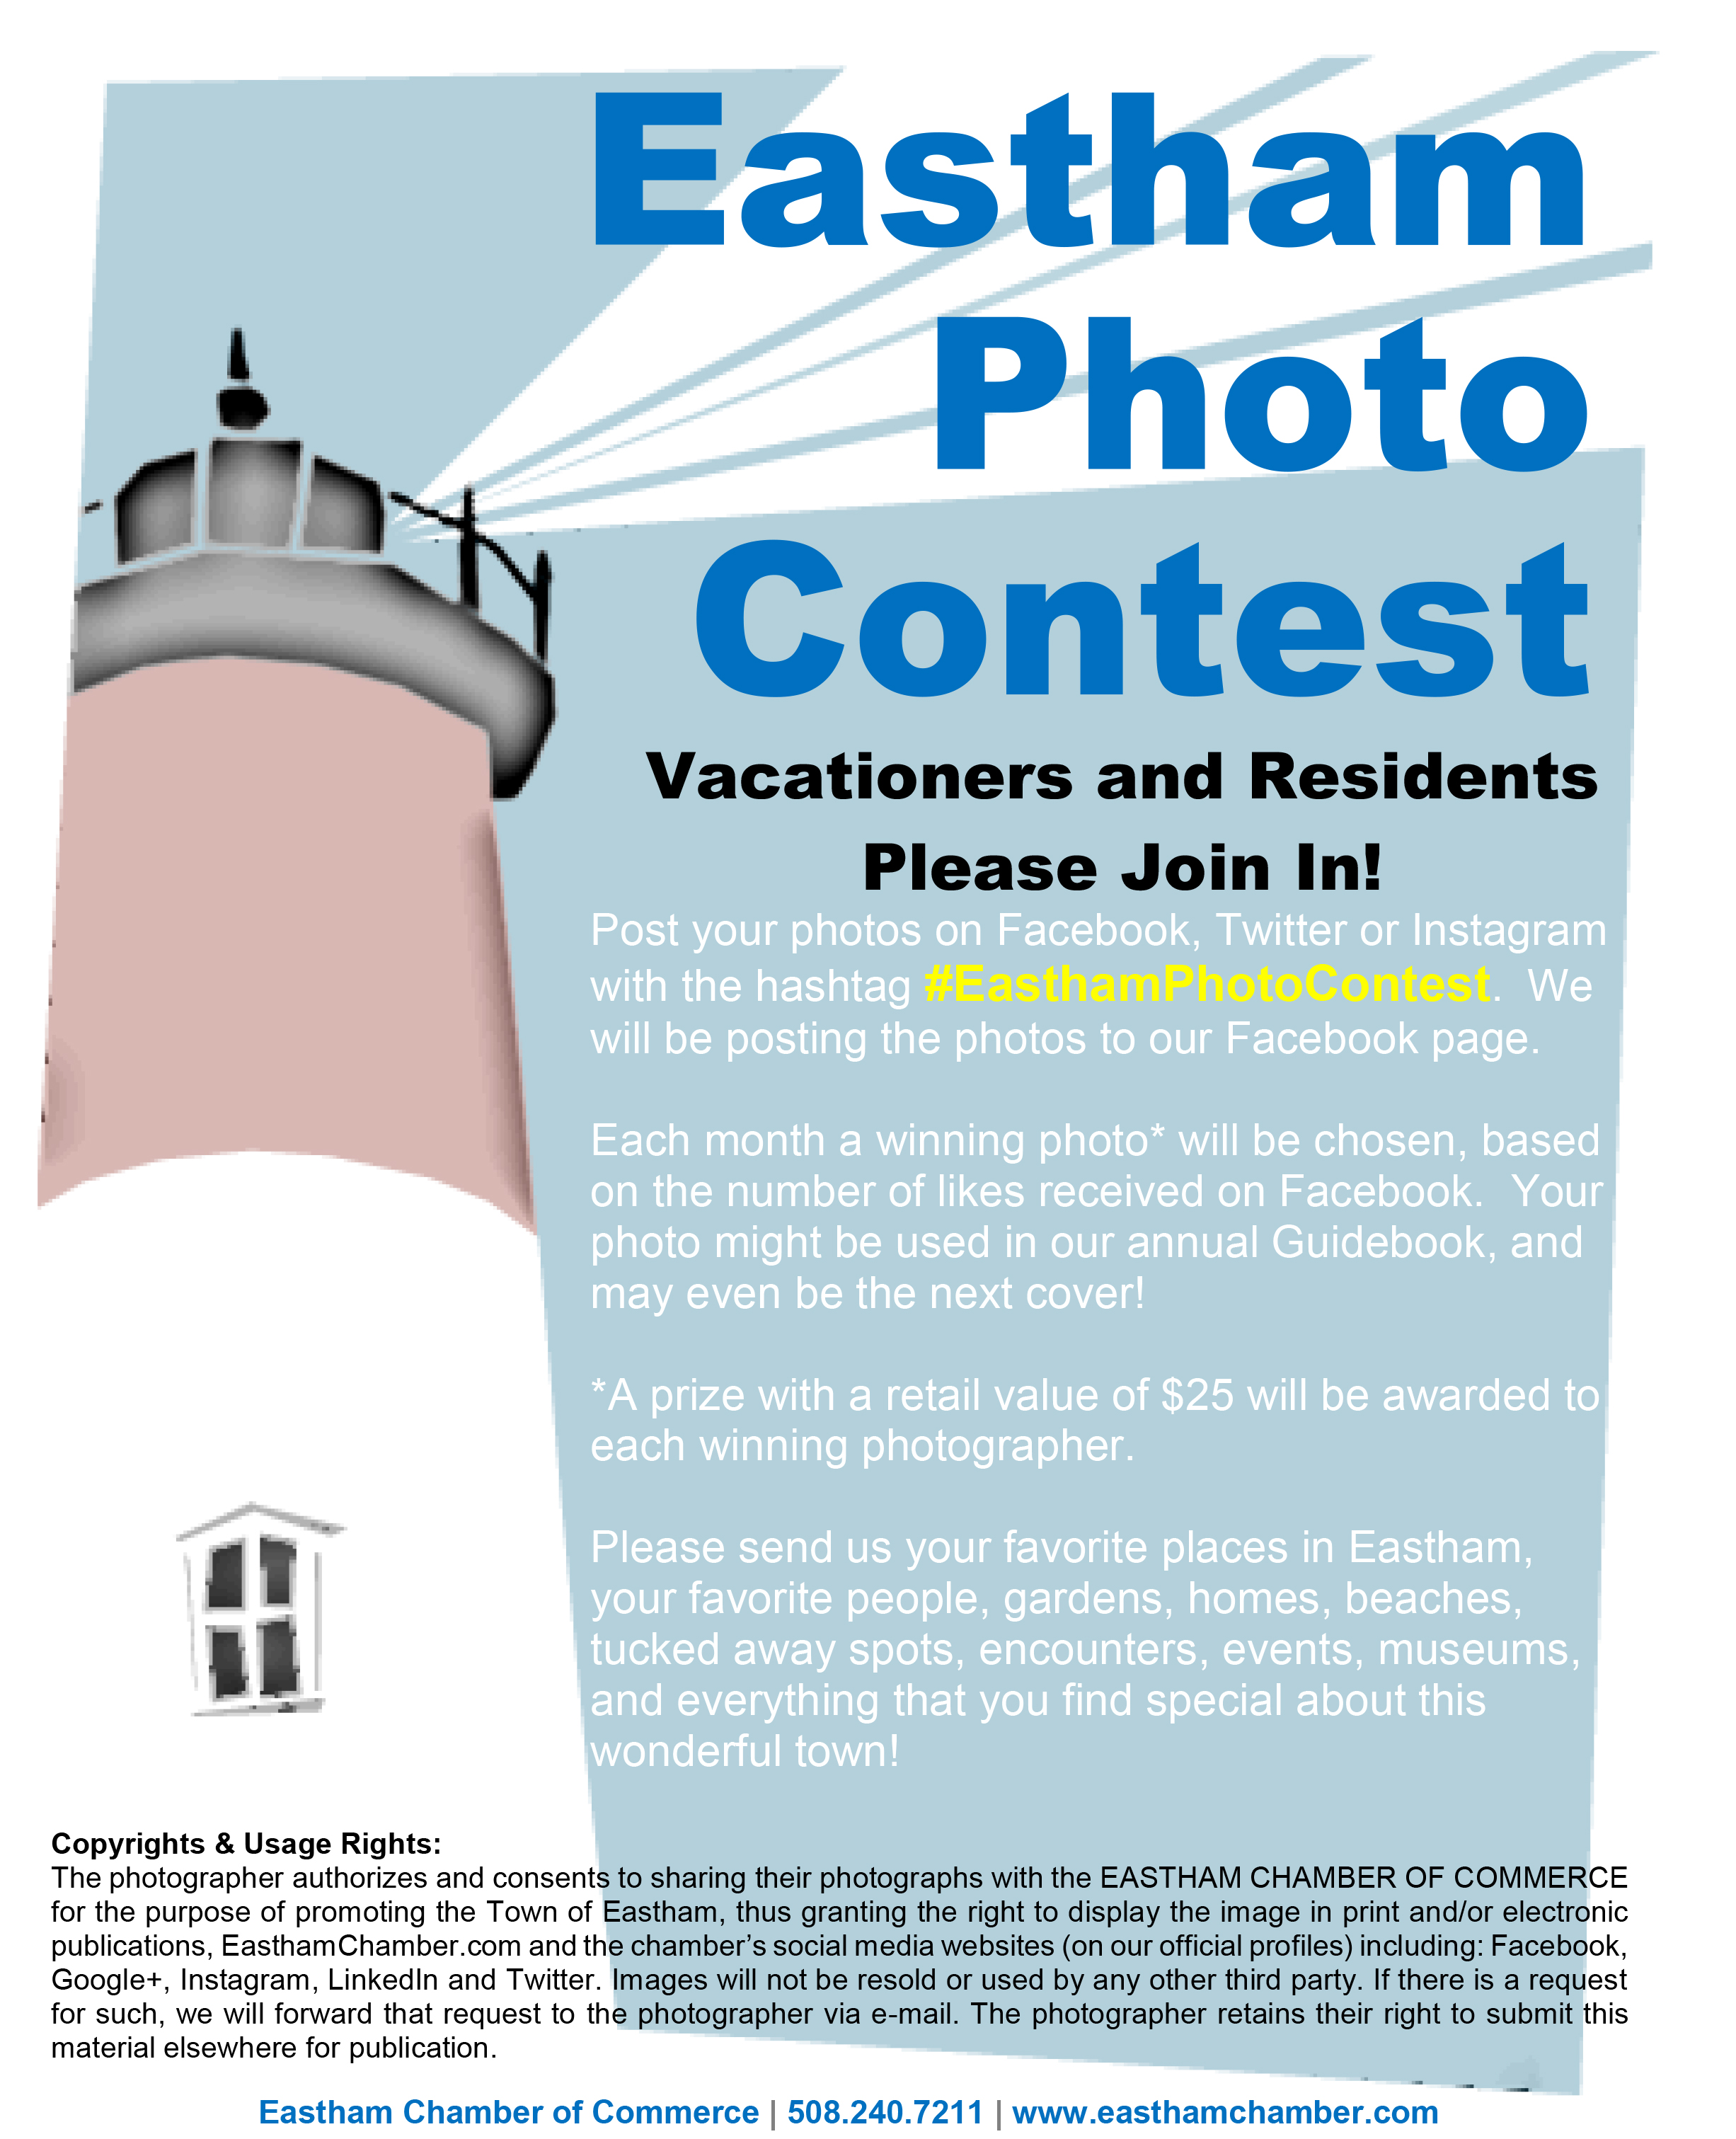 Eastham Photo Contest Flyer-1